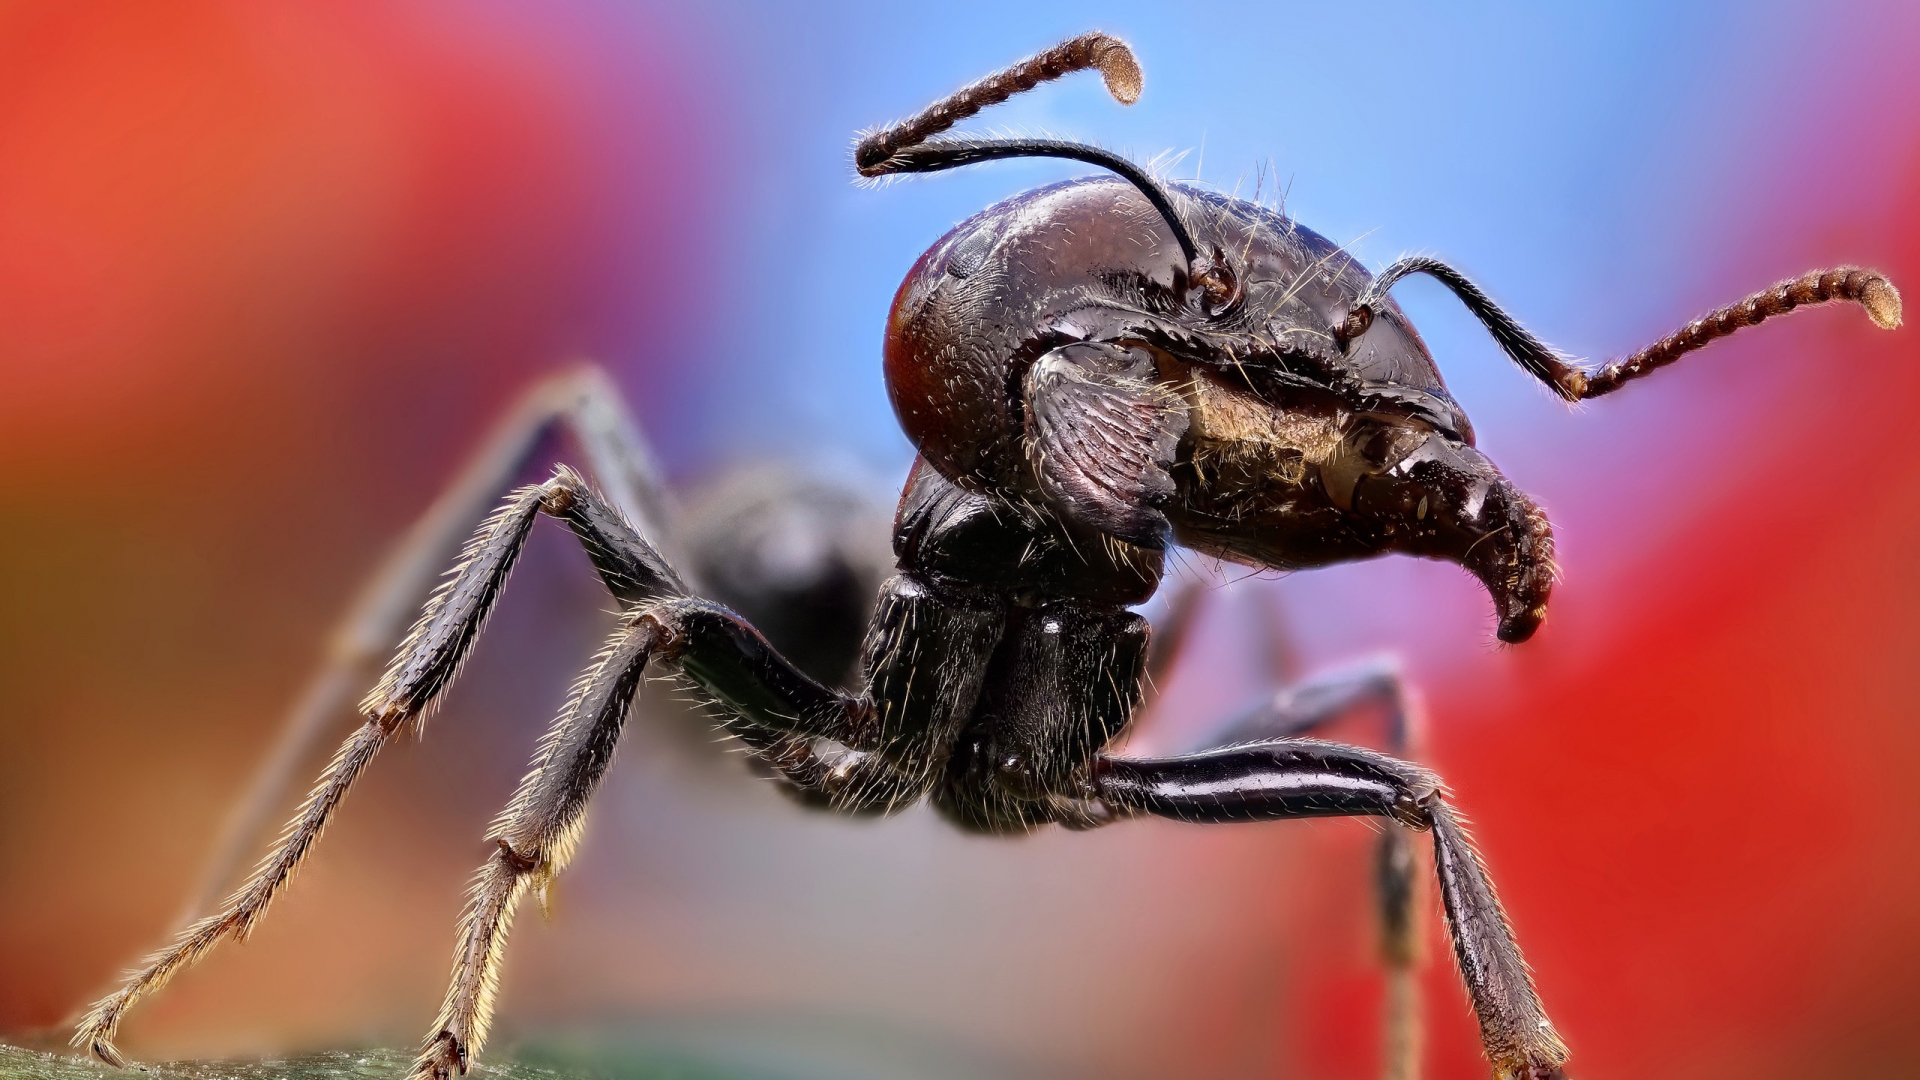 Ant Close Up for 1920 x 1080 HDTV 1080p resolution